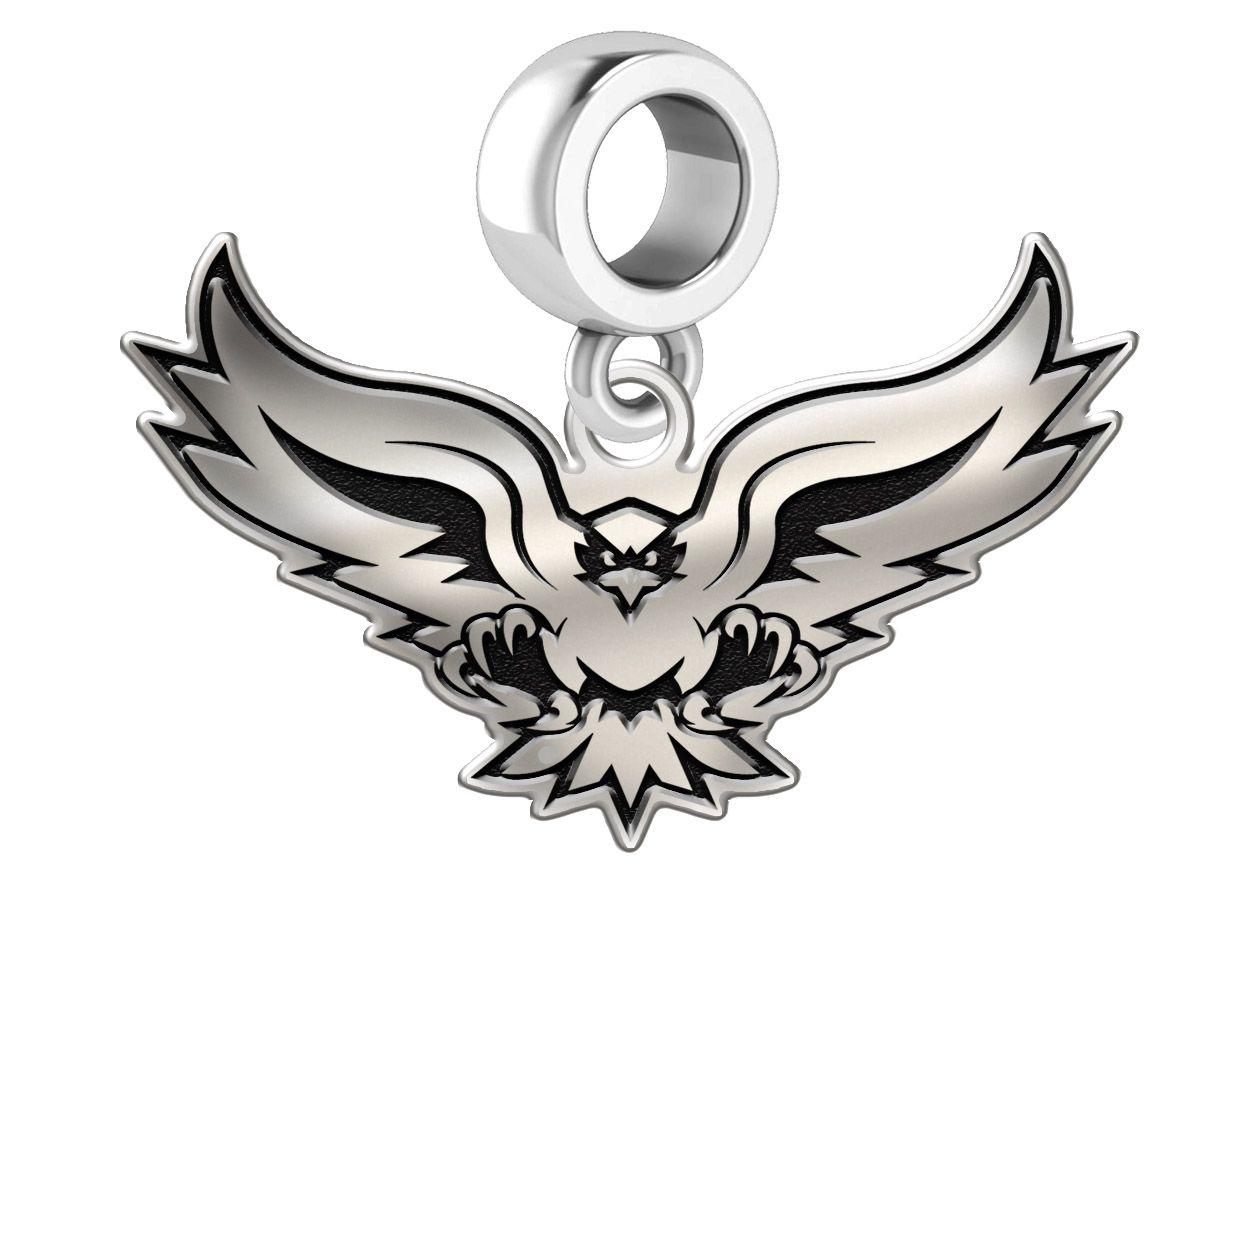 Hartford Hawks Logo - Wholesale Hartford Hawks Sterling Silver Charms and College Jewelry.